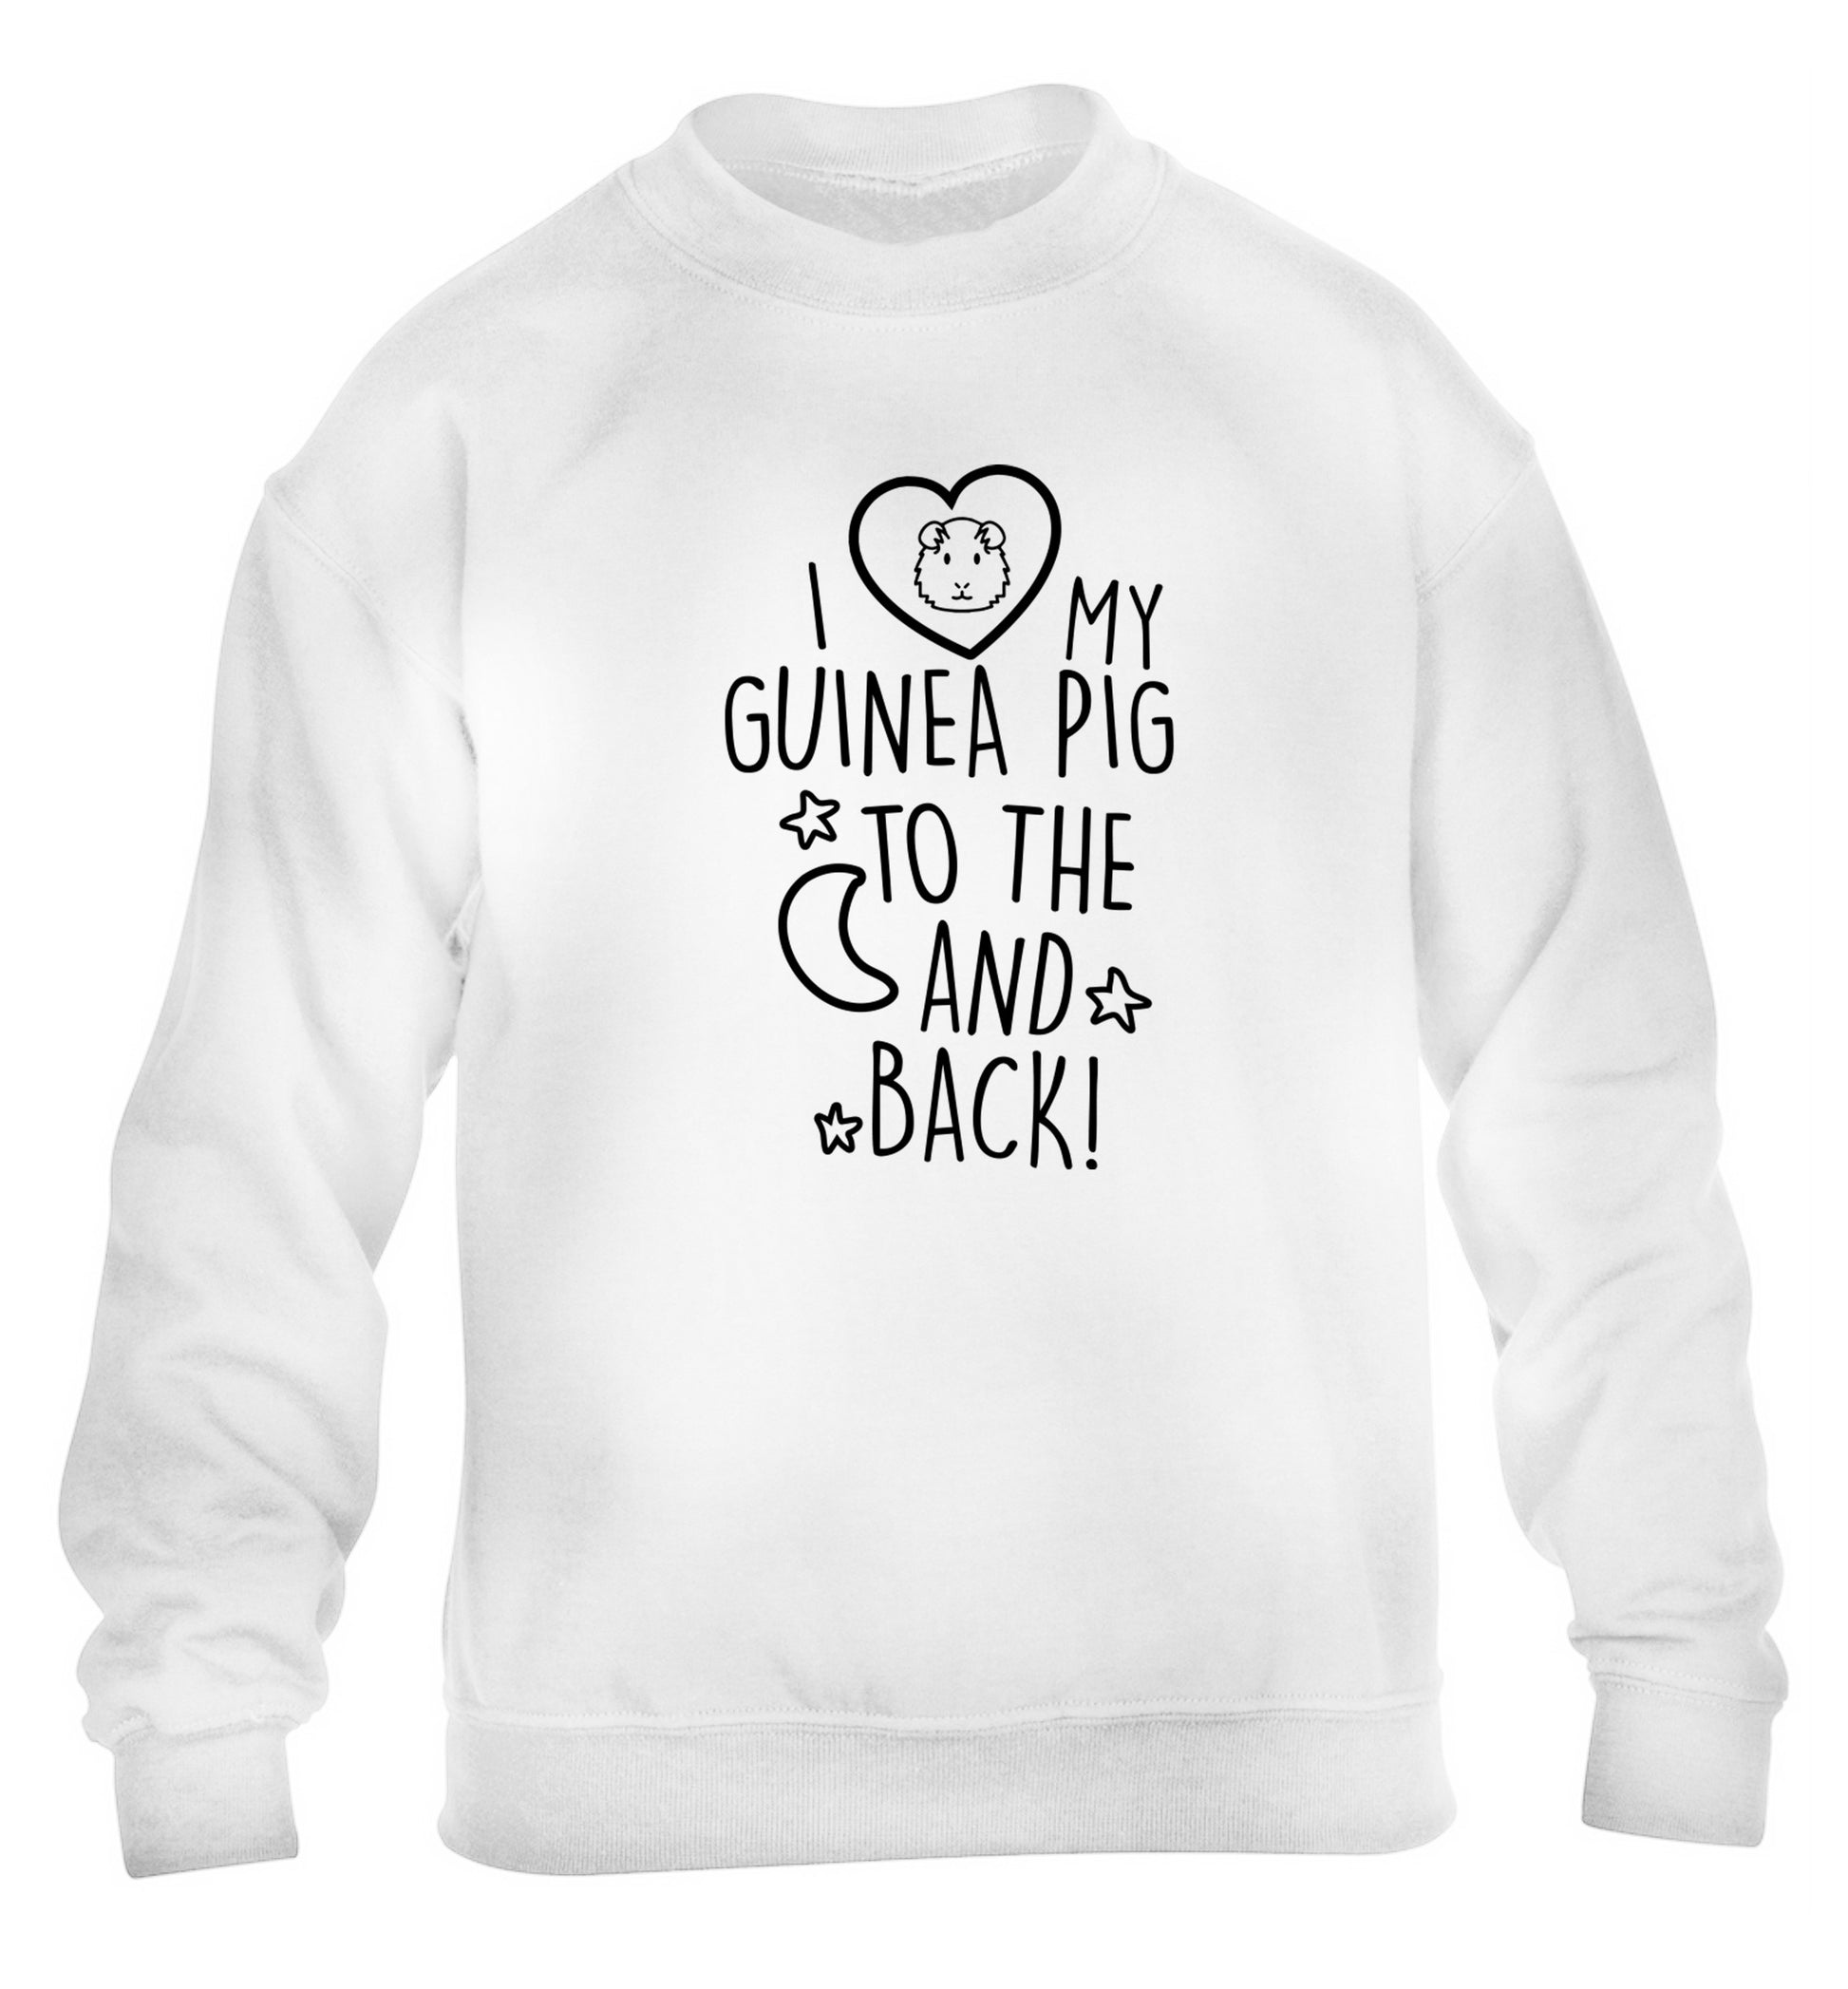 I love my guinea pig to the moon and back children's white  sweater 12-14 Years